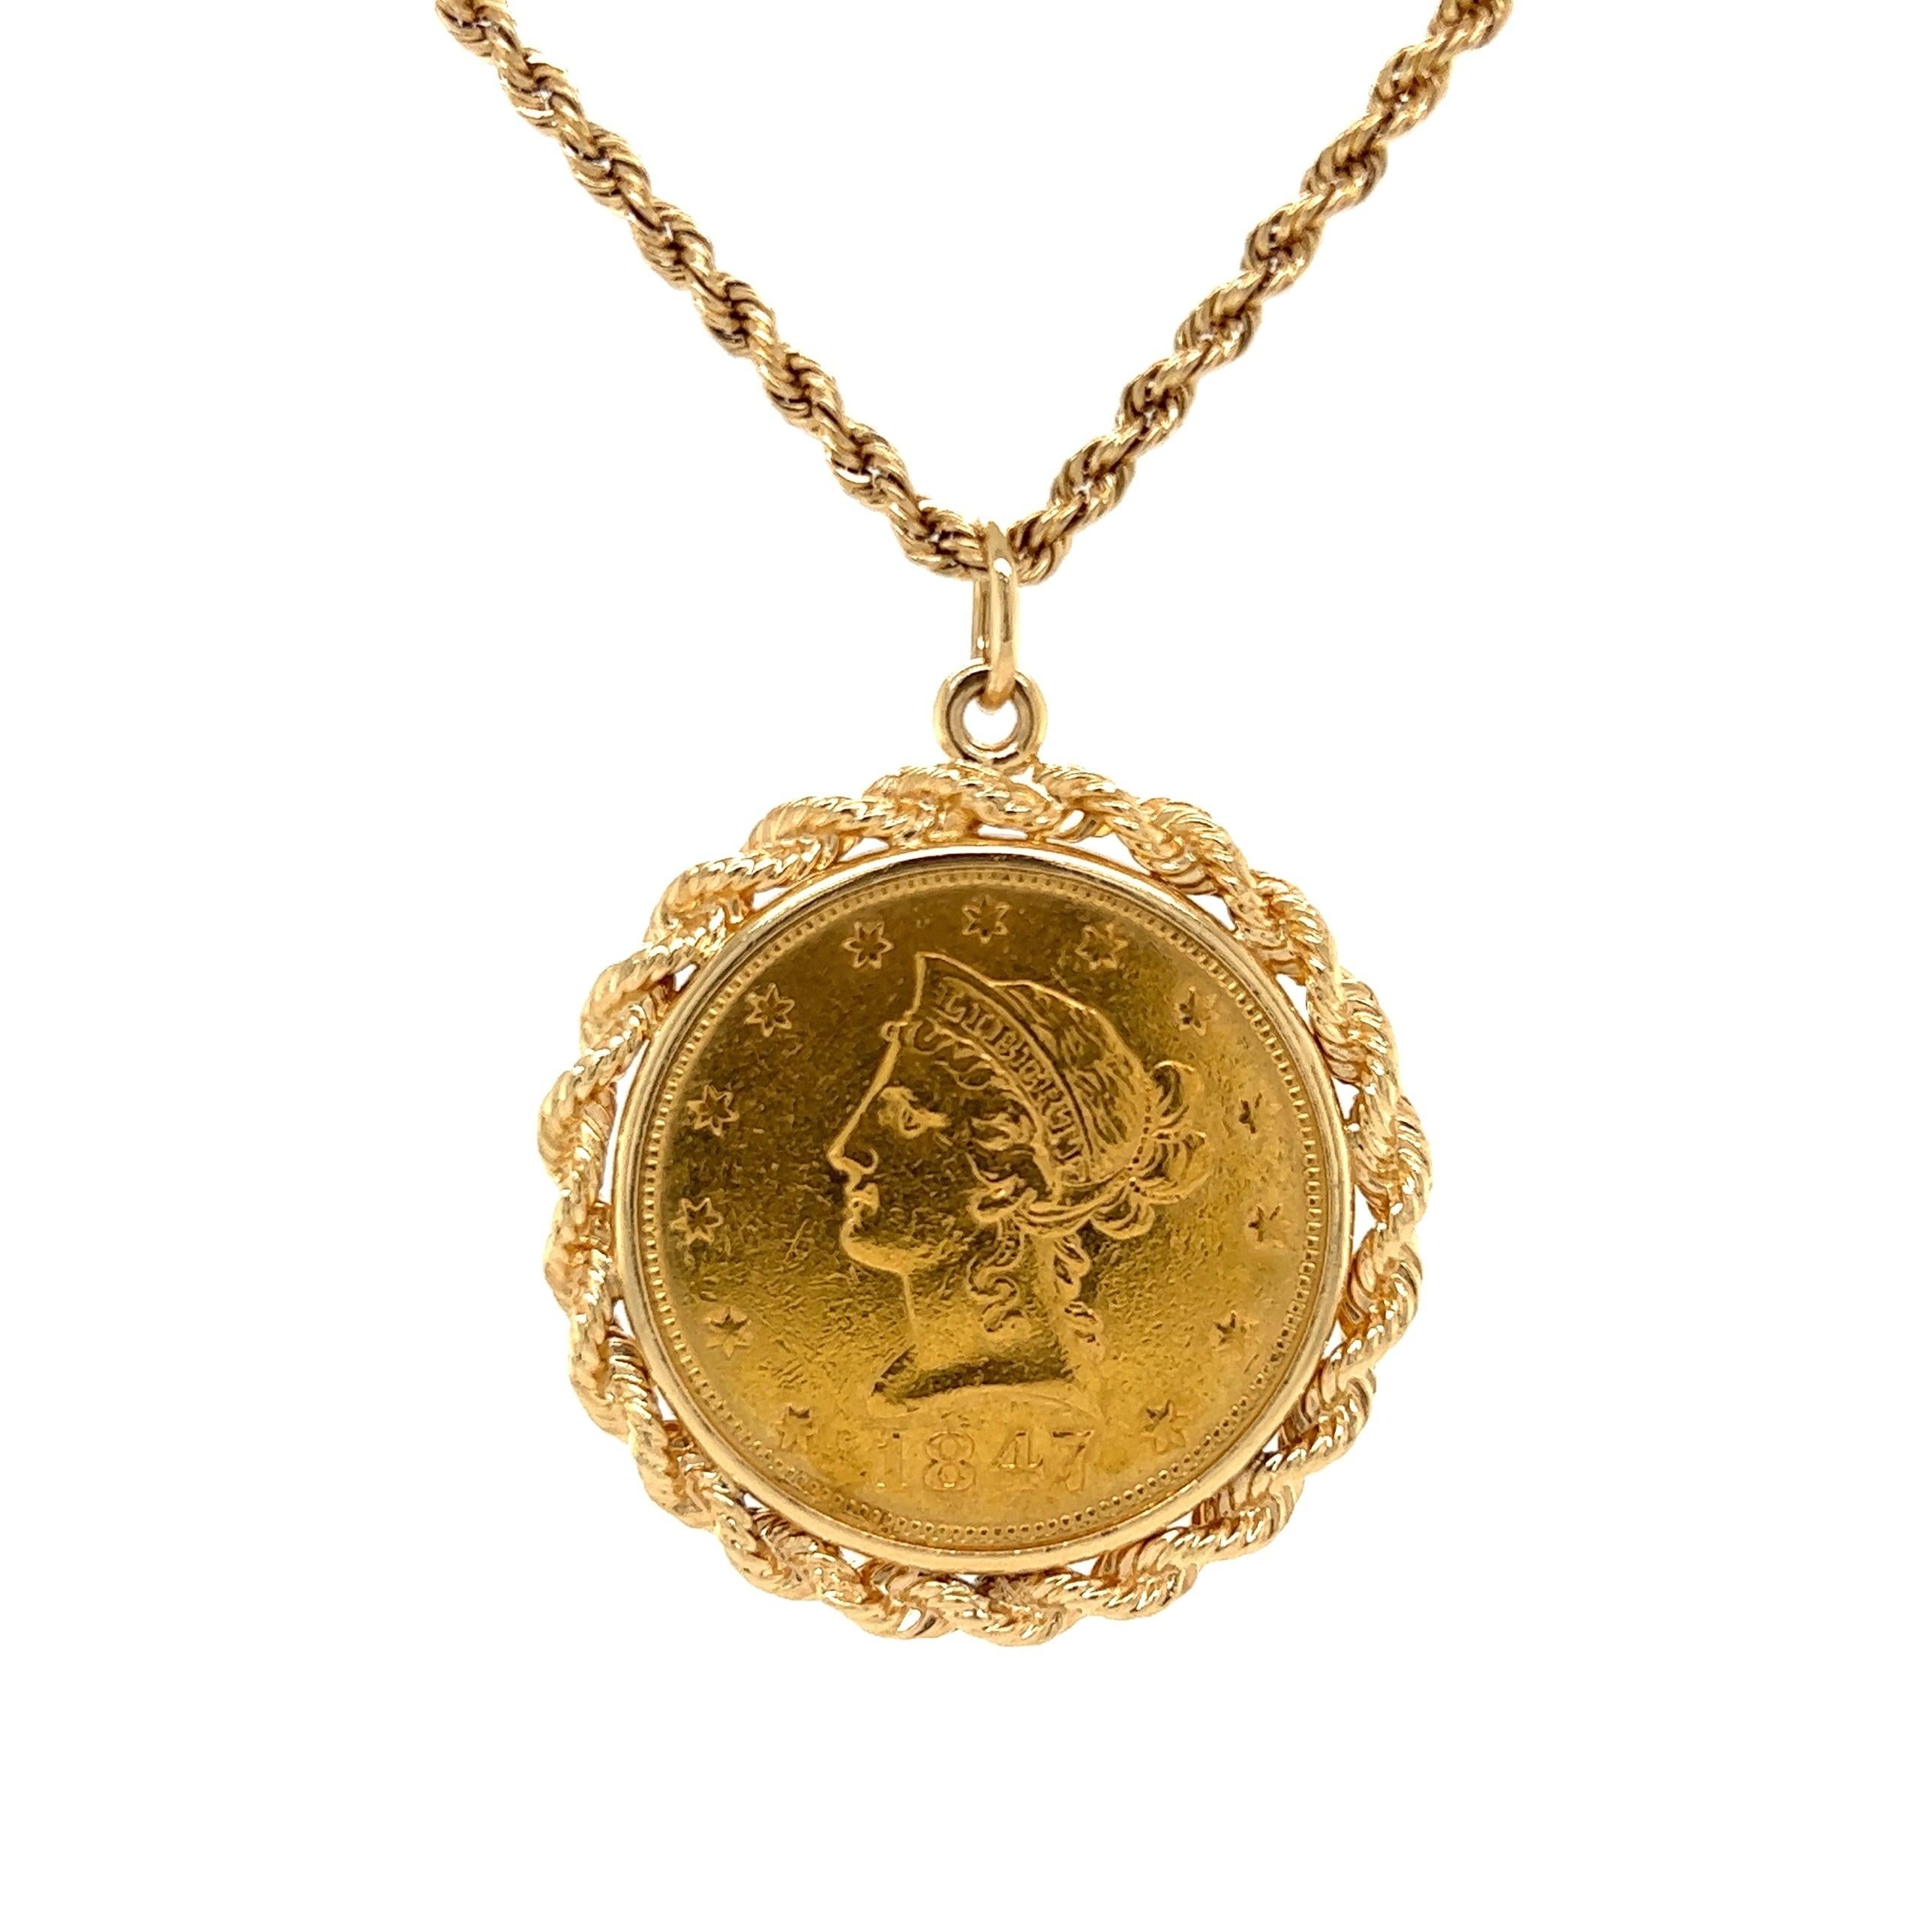 Simply Beautiful! Gold Coin Necklace. Hand set with American Liberty Head 10 Dollar Gold Coin, c1847. Hand crafted 14 Karat Yellow Gold mounting, suspended from an 18” long Gold Rope Chain. Approx. Dimensions:  1.48